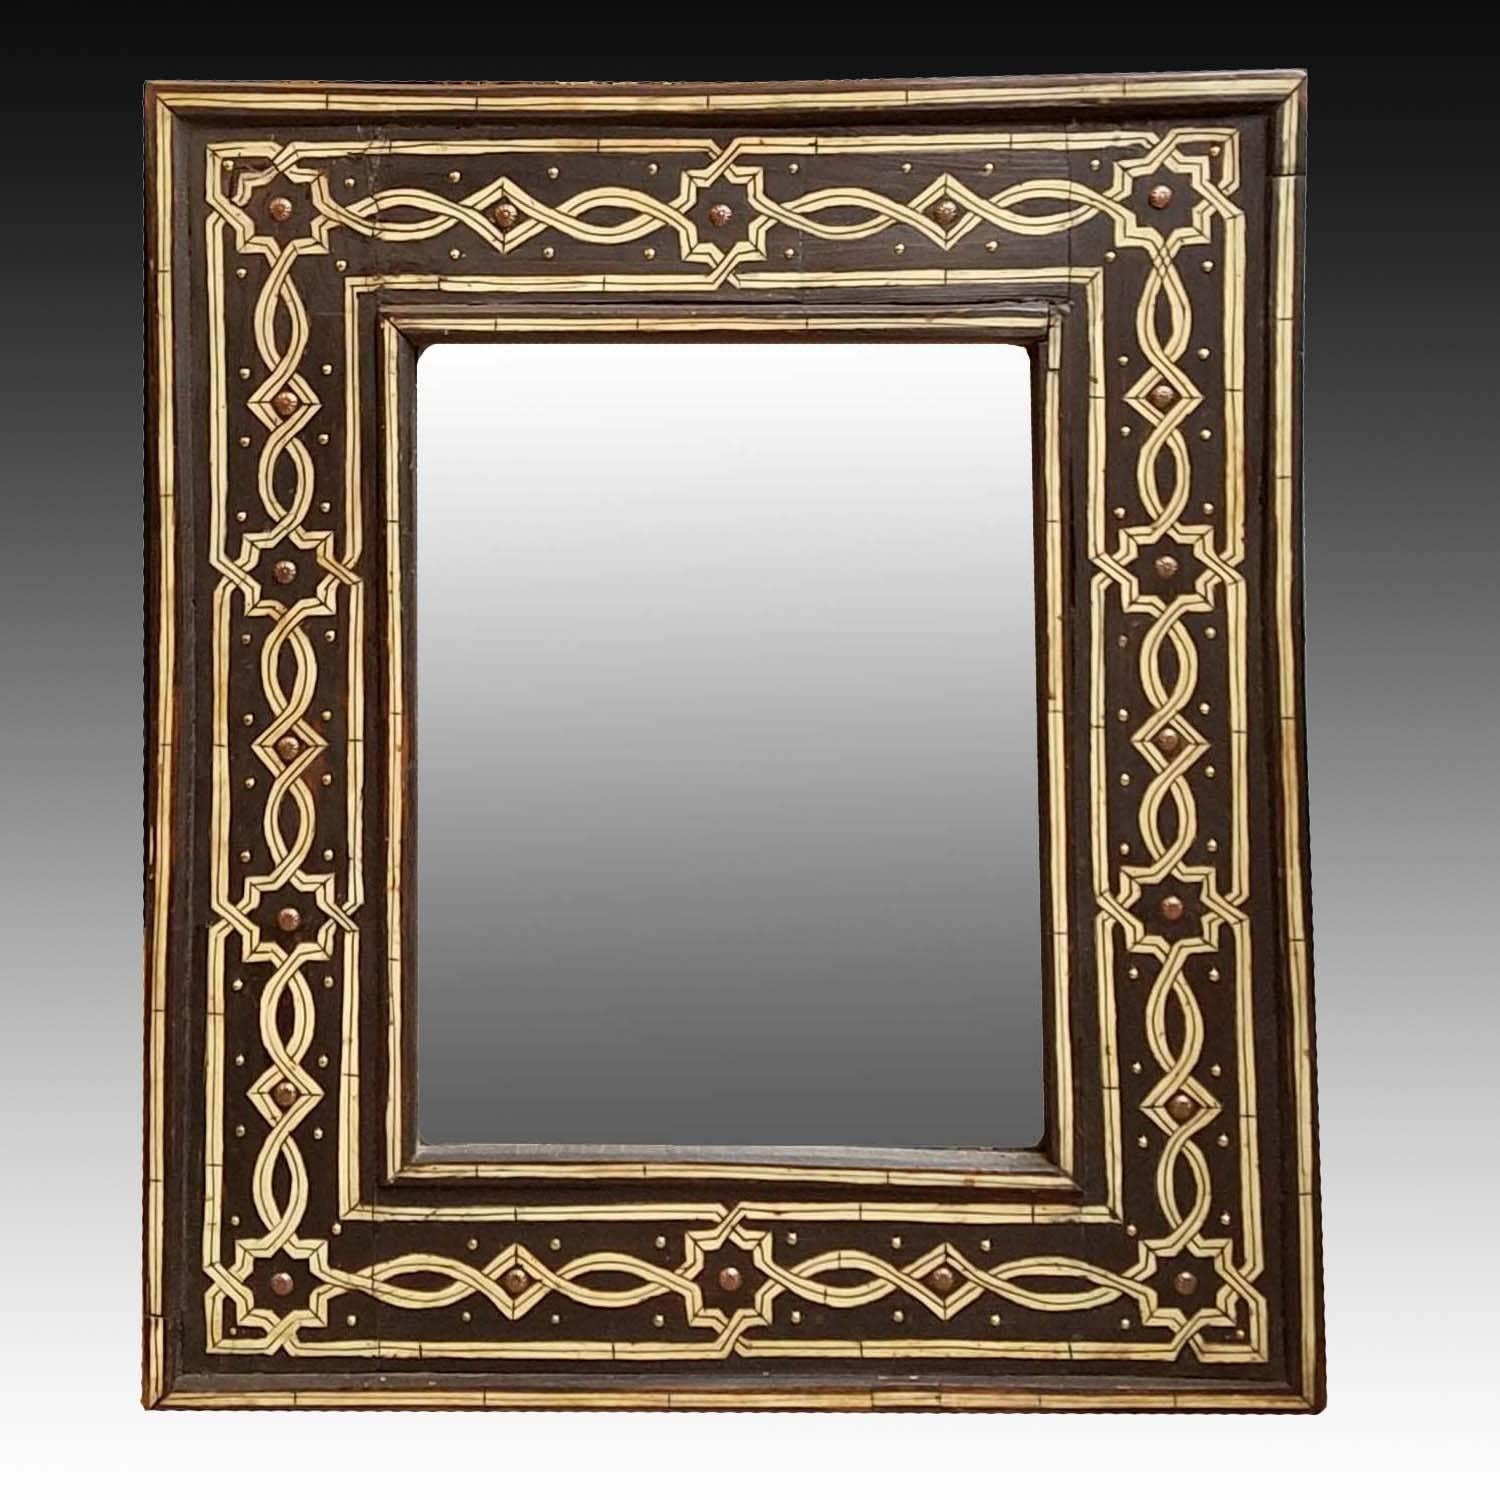 New arrival. New model. An amazing camel bone and metal inlaid mirror from Morocco. Just another amazing piece of work from Marrakech. Very elegant and chic looking. It measures approximately 25